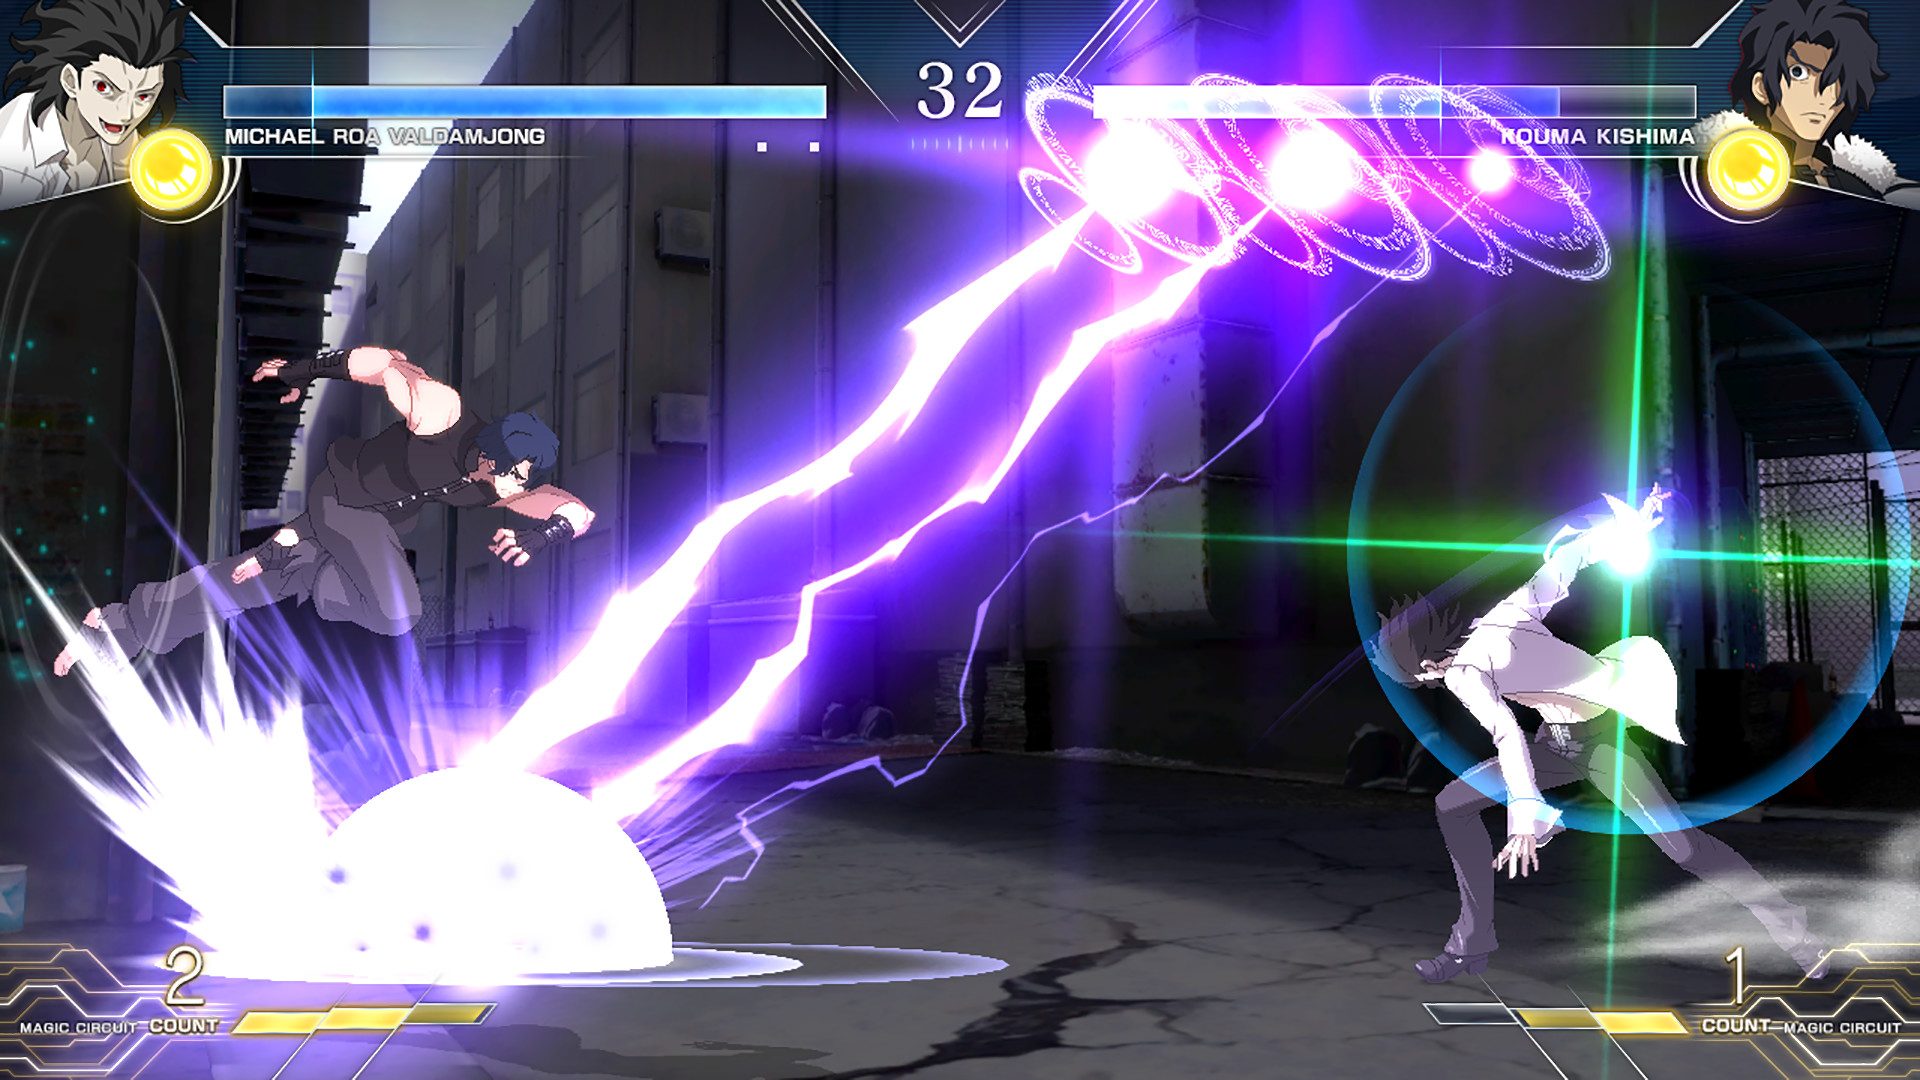 Style and Substance: What Makes an Anime Fighting Game?